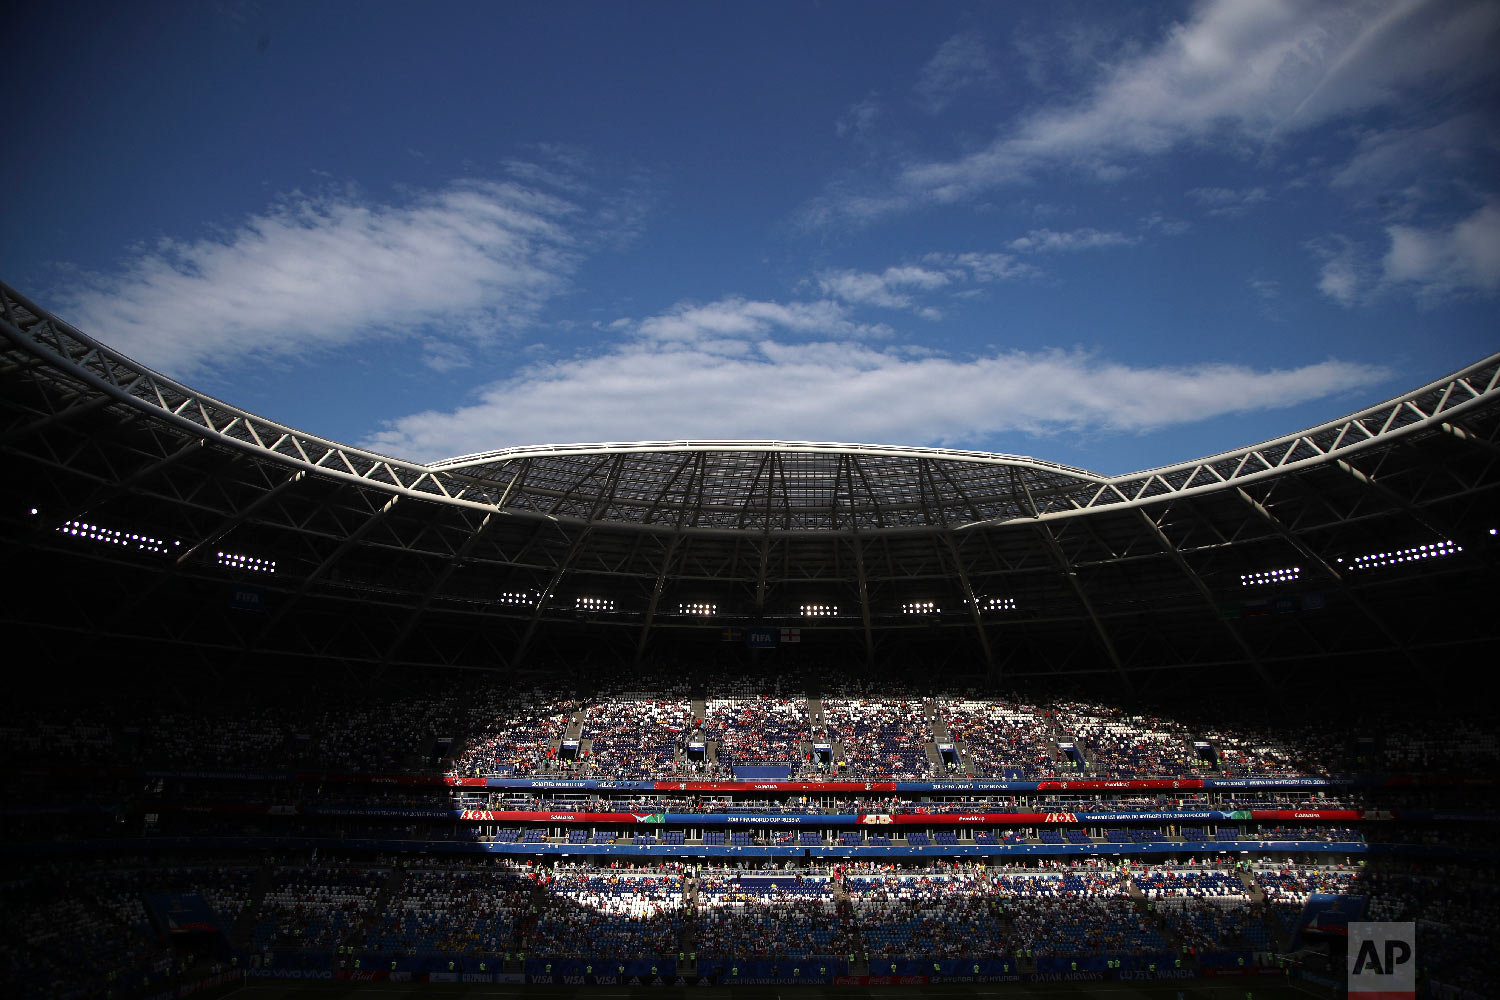  Spectators on the stands wait for the start of the quarterfinal match between Sweden and England at the 2018 soccer World Cup in the Samara Arena, in Samara, Russia, Saturday, July 7, 2018. (AP Photo/Thanassis Stavrakis) 